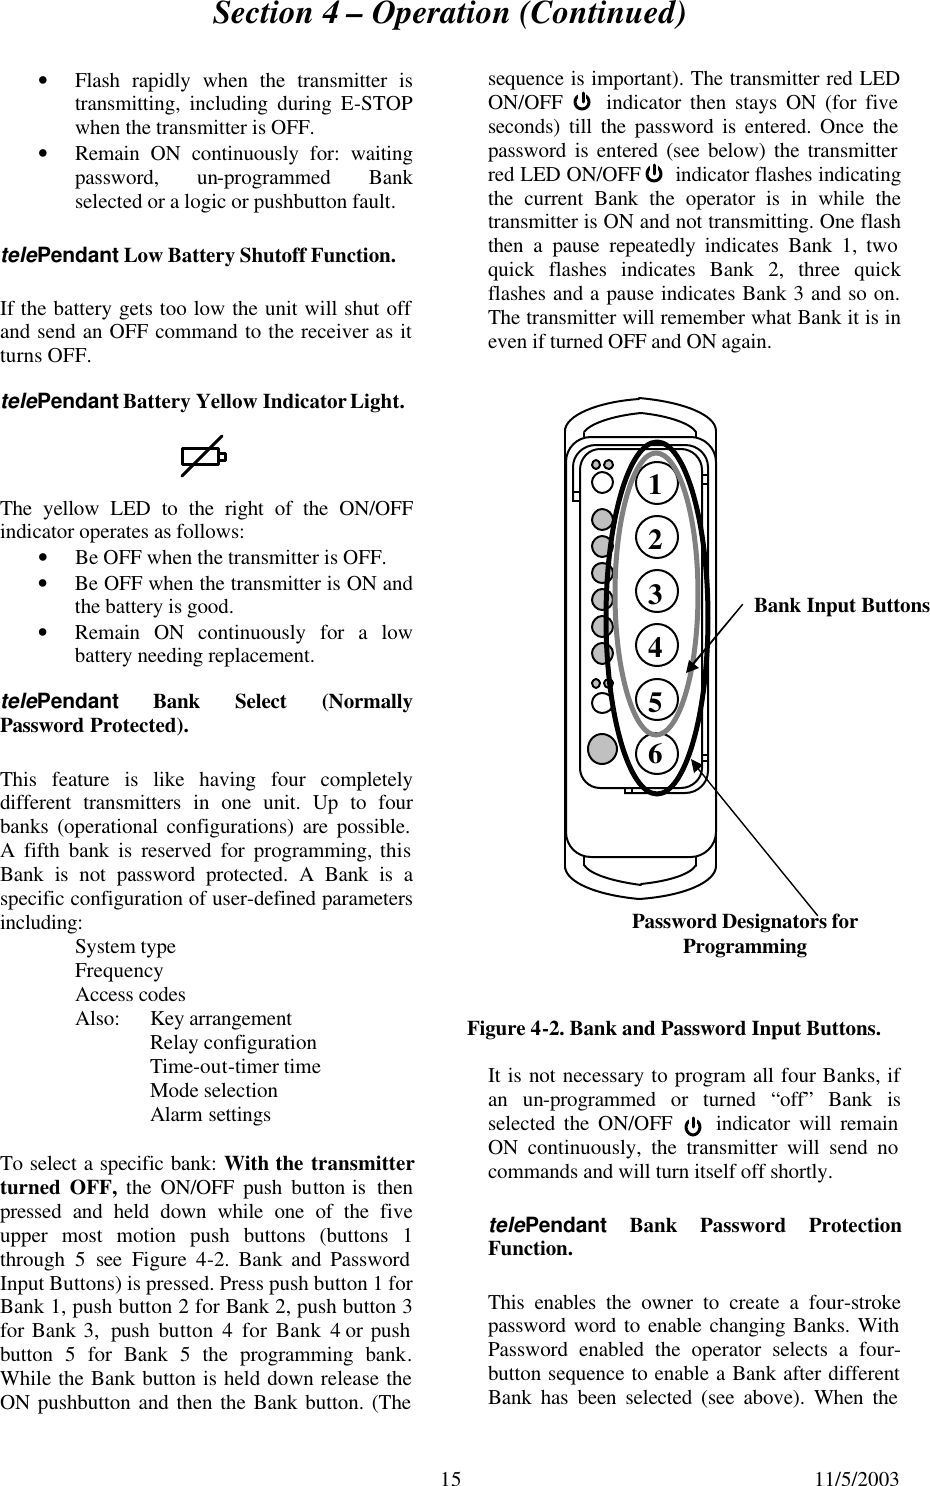 Section 4 – Operation (Continued)  15 11/5/2003 • Flash rapidly when the transmitter is transmitting, including during E-STOP when the transmitter is OFF. • Remain ON continuously for: waiting password, un-programmed Bank selected or a logic or pushbutton fault. telePendant Low Battery Shutoff Function. If the battery gets too low the unit will shut off and send an OFF command to the receiver as it turns OFF. telePendant Battery Yellow Indicator Light.  The yellow LED to the right of the ON/OFF indicator operates as follows: • Be OFF when the transmitter is OFF. • Be OFF when the transmitter is ON and the battery is good. • Remain ON continuously for a low battery needing replacement. telePendant Bank Select (Normally Password Protected). This feature is like having four completely different transmitters in one unit. Up to four banks (operational configurations) are possible. A fifth bank is reserved for programming, this Bank is not password protected.  A Bank is a specific configuration of user-defined parameters including:  System type Frequency  Access codes  Also: Key arrangement Relay configuration  Time-out-timer time  Mode selection  Alarm settings To select a specific bank: With the transmitter turned OFF,  the ON/OFF push button is  then pressed and held down while one of the five upper most motion push buttons (buttons 1 through  5 see Figure  4-2. Bank and Password Input Buttons) is pressed. Press push button 1 for Bank 1, push button 2 for Bank 2, push button 3 for Bank 3,  push button 4 for Bank 4 or push button 5 for Bank 5 the programming bank. While the Bank button is held down release the ON pushbutton and then the Bank button. (The sequence is important). The transmitter red LED ON/OFF     indicator then stays ON (for five seconds) till the password is entered. Once the password is entered (see below) the transmitter red LED ON/OFF      indicator flashes indicating the current Bank the operator is in while the transmitter is ON and not transmitting. One flash then a pause repeatedly indicates Bank 1, two quick flashes indicates Bank 2, three quick flashes and a pause indicates Bank 3 and so on. The transmitter will remember what Bank it is in even if turned OFF and ON again.               It is not necessary to program all four Banks, if an un-programmed or turned “off” Bank is selected the ON/OFF     indicator will remain ON continuously, the transmitter will send no commands and will turn itself off shortly. telePendant Bank Password Protection Function. This enables the owner to create a four-stroke password word to enable changing Banks. With Password enabled the operator selects a four-button sequence to enable a Bank after different Bank has been selected (see above). When the Figure 4-2. Bank and Password Input Buttons. 1  2  3  4  5  6 Bank Input Buttons Password Designators for Programming 